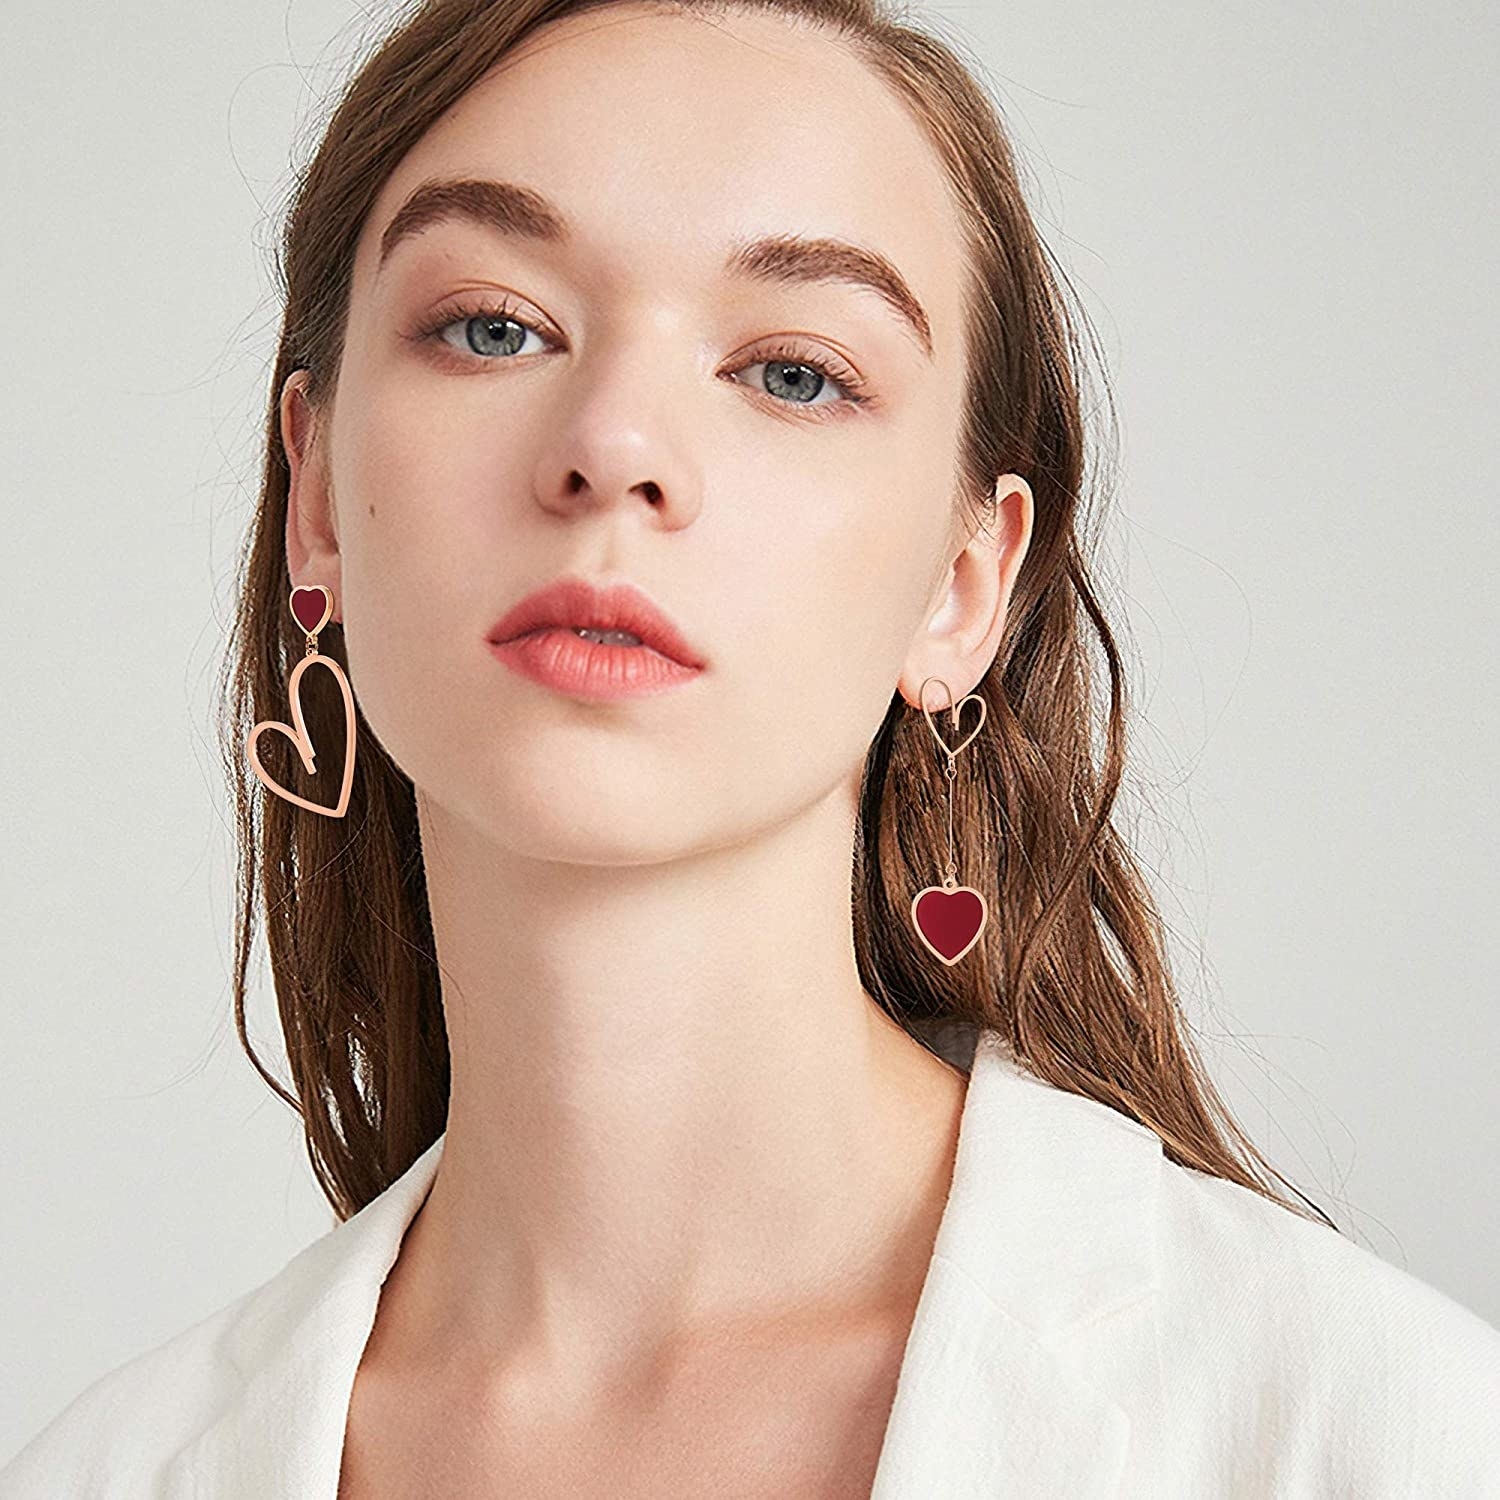 model in gold and red heart earrings, one with a heart charm in drop style and a red heart post and the other with a longer dangle, two medium-size hearts connected by a chain